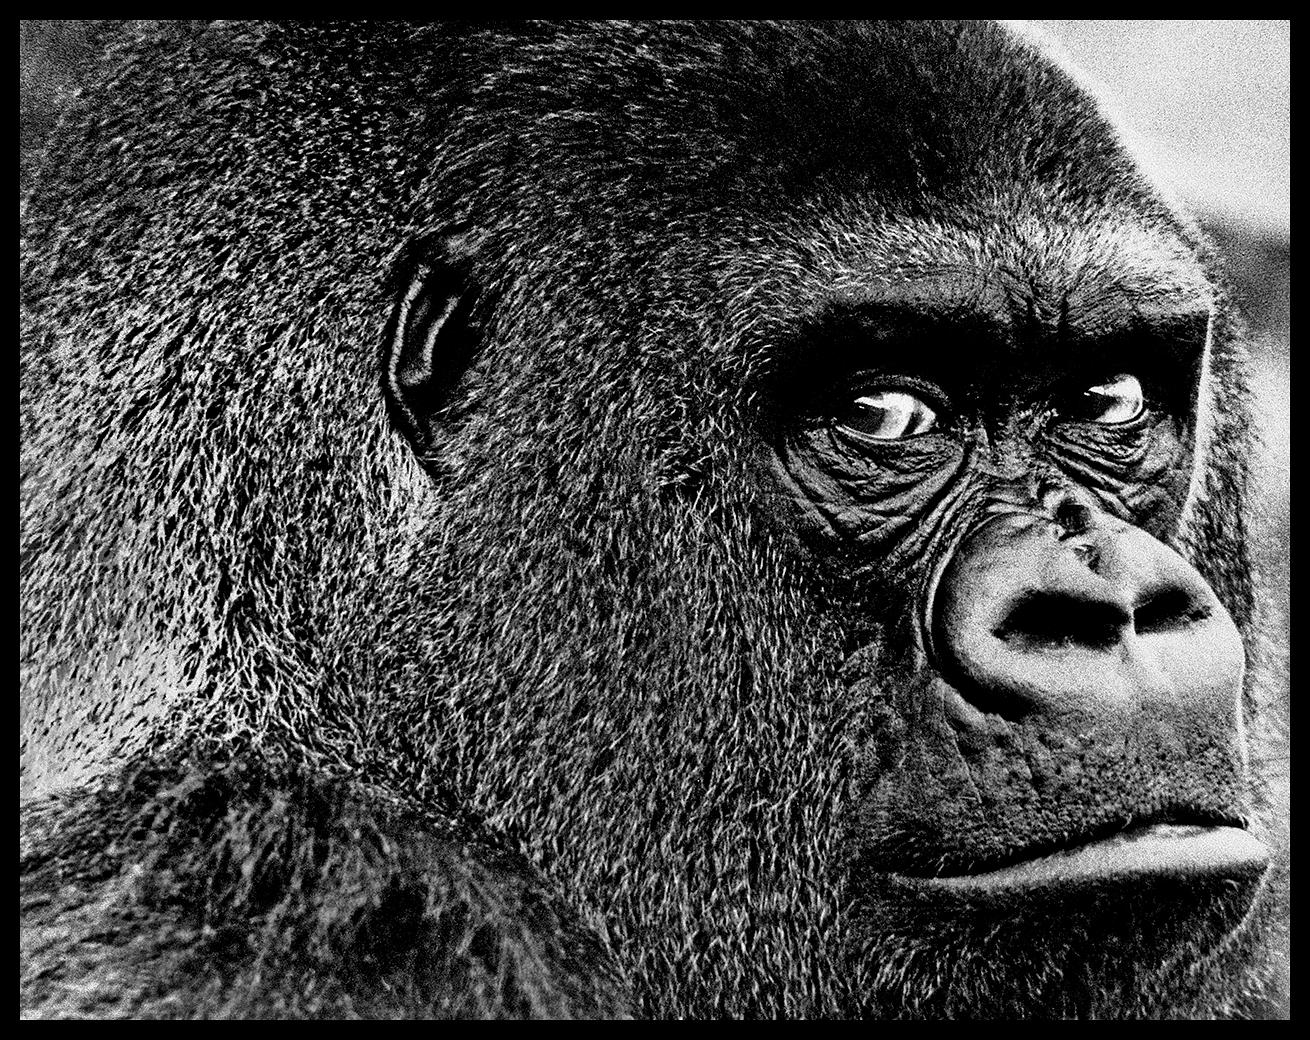 Guy The Gorilla Regent's Park London

By Arthur Steel 

Paper size: 44 x 33.5" / 112 x 85 cm

Silver Gelatin Print
1970 (printed later)
unframed
hand signed
limited edition of 30

note other print sizes and framing options are available, please